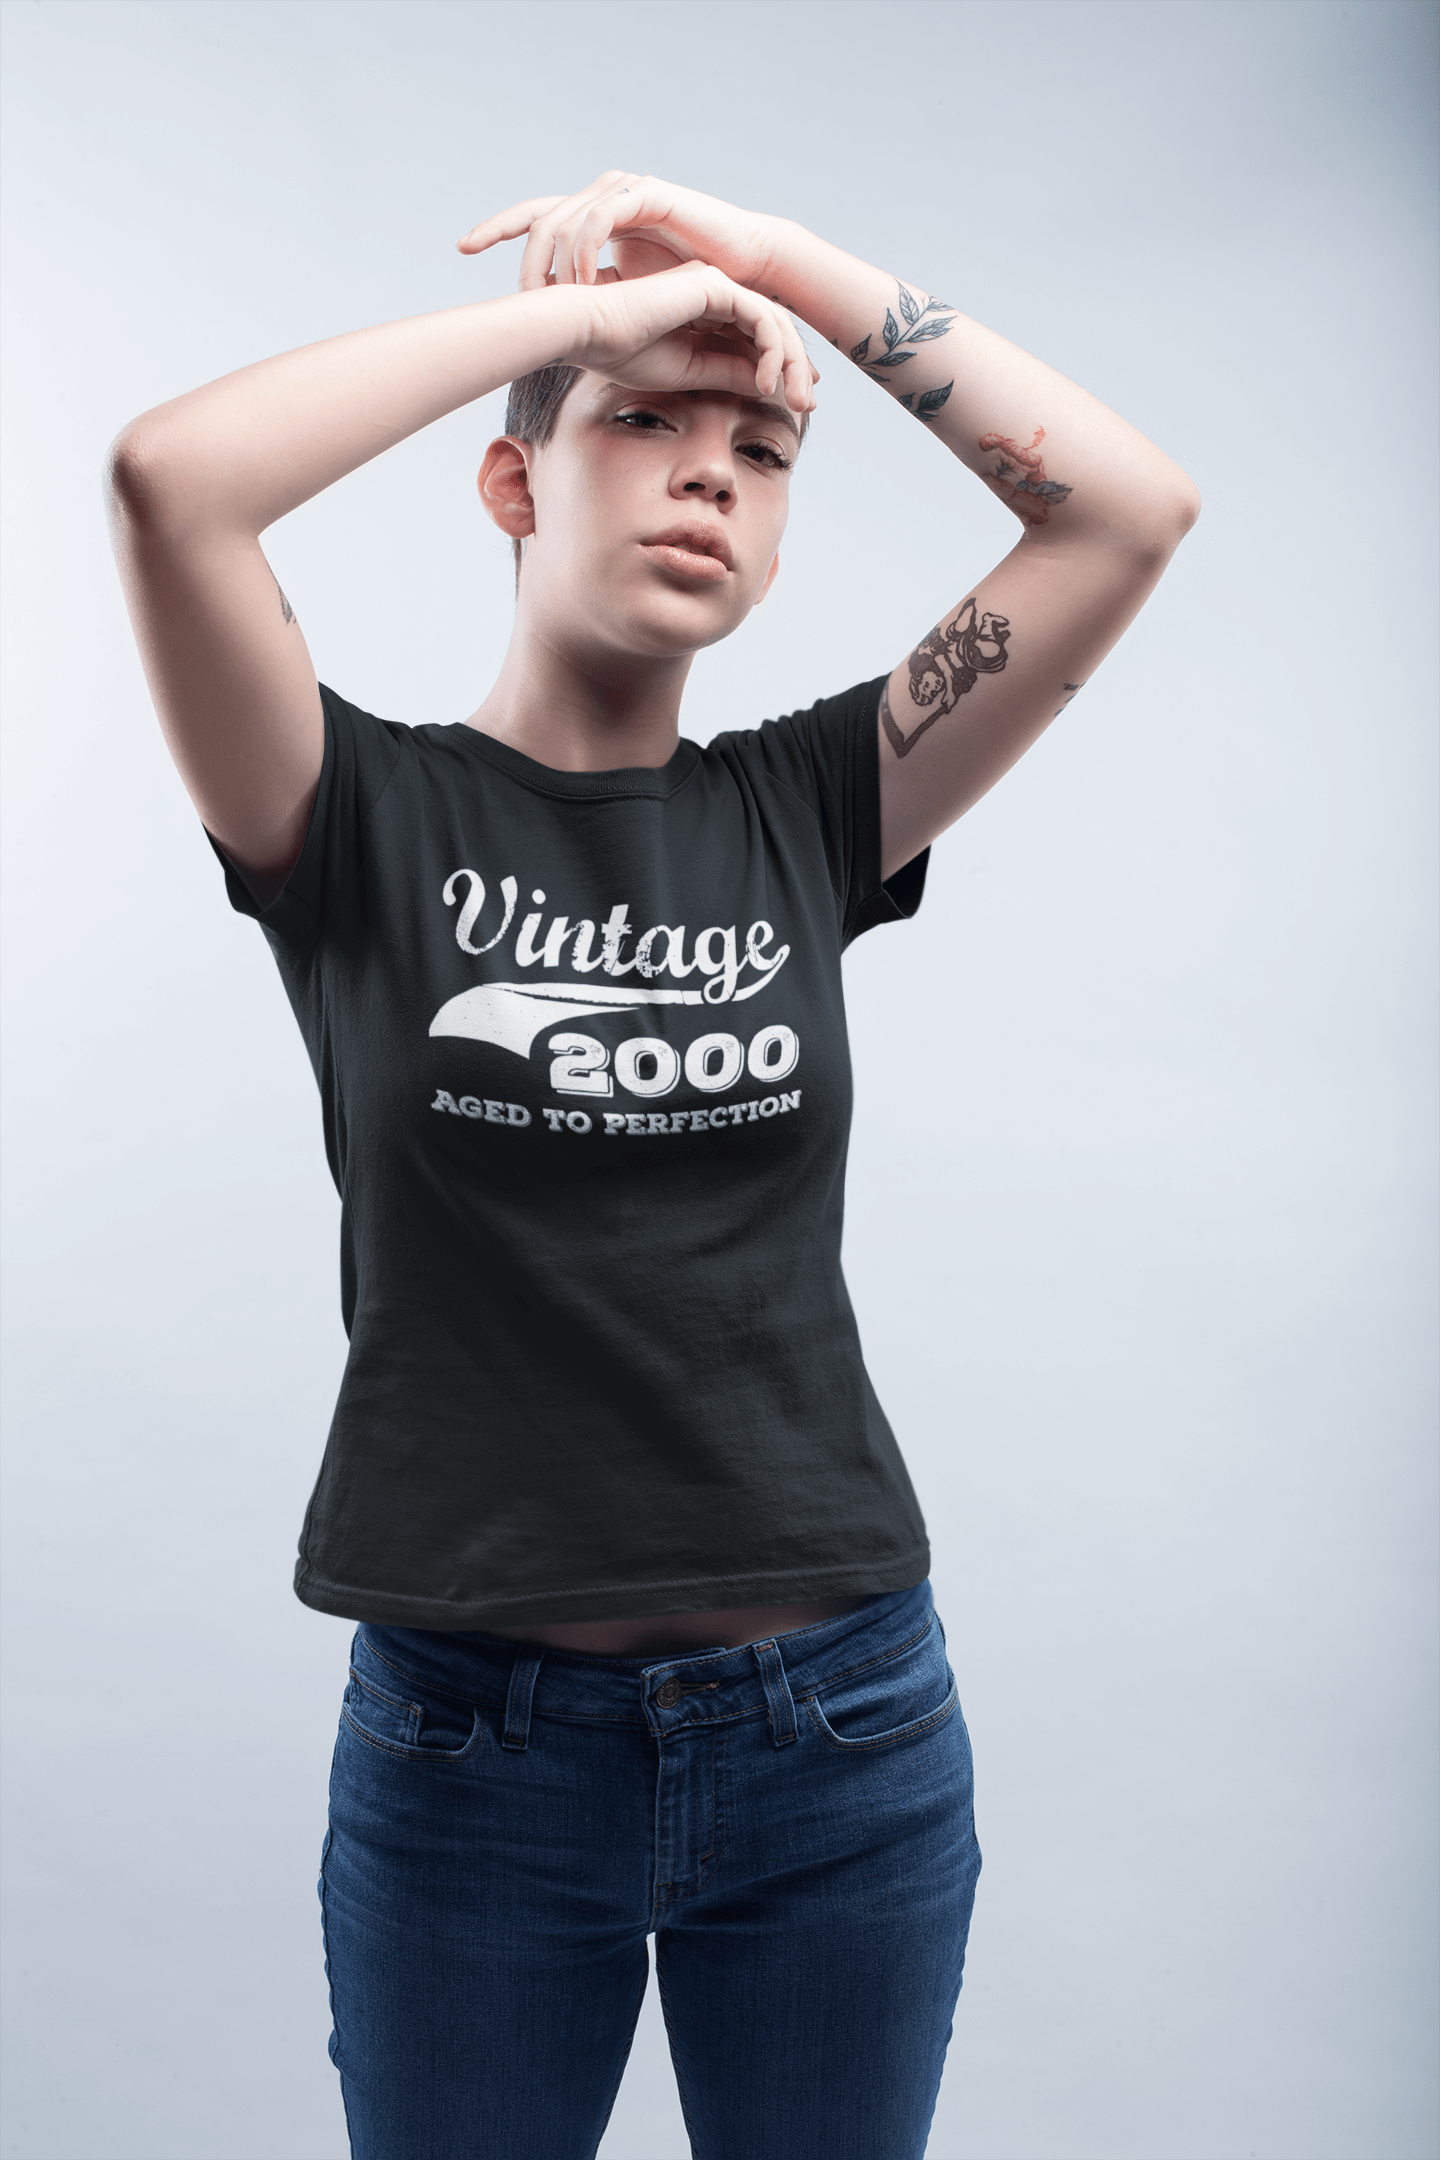 Vintage Aged to Perfection 2000, Black, Women's Short Sleeve Round Neck T-shirt, gift t-shirt 00345